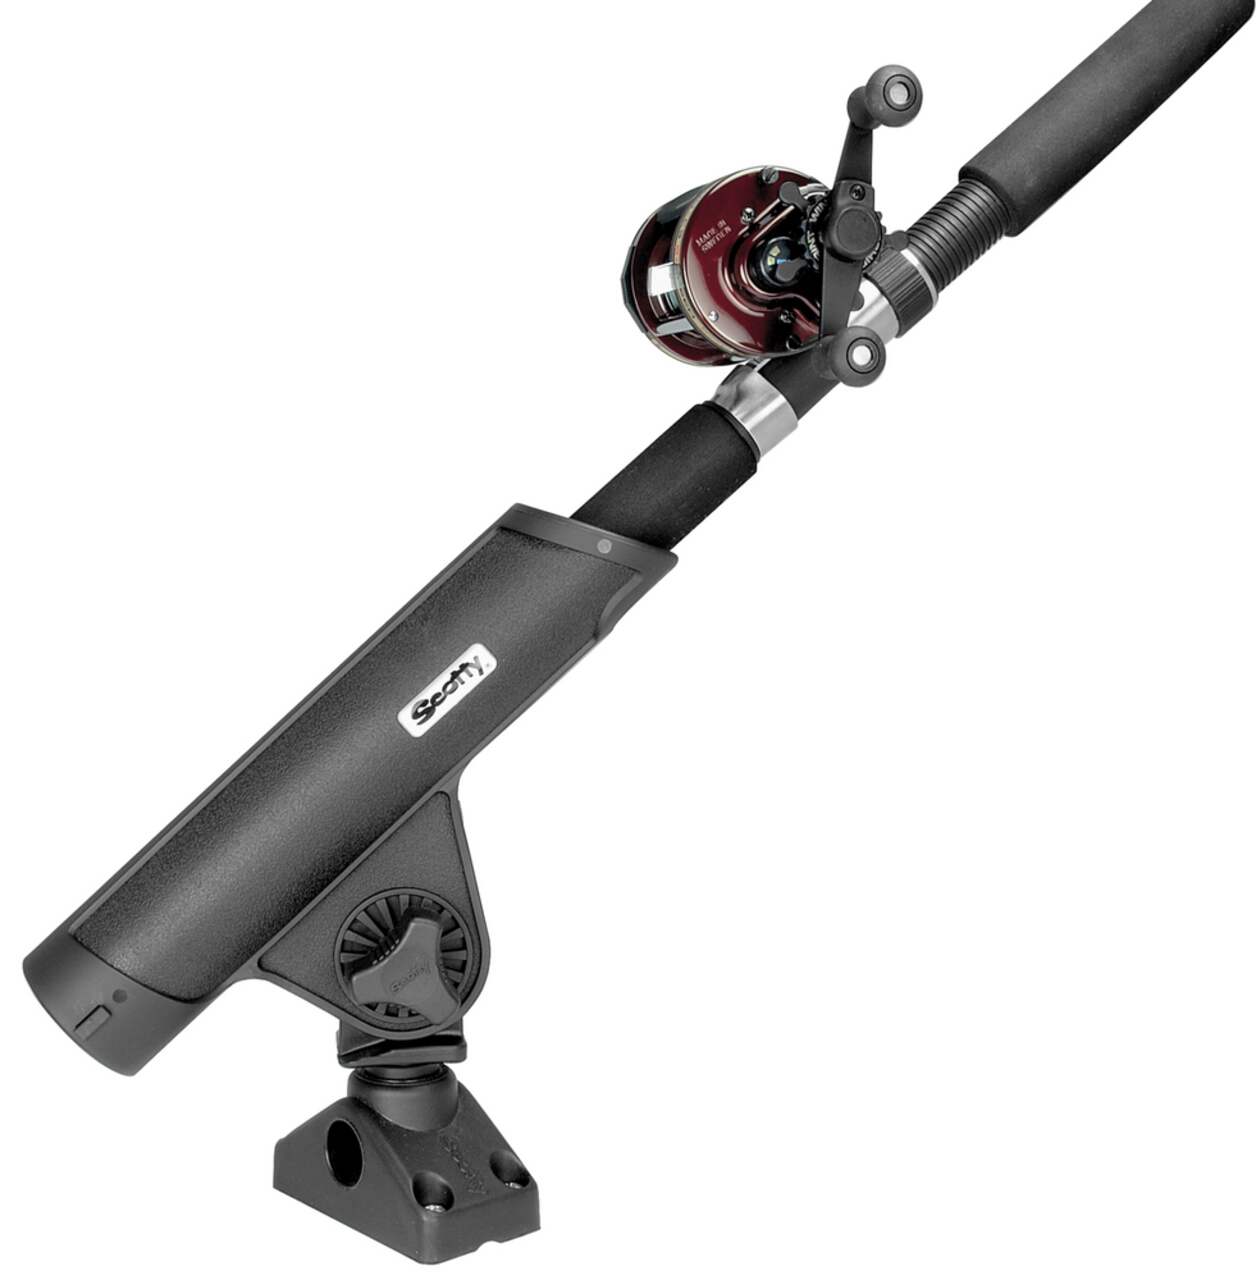 https://media-www.canadiantire.ca/product/playing/fishing/fishing-equipment/0785975/scotty-rod-master-2-2182e25b-55e8-482a-b453-c97df9474c80.png?imdensity=1&imwidth=640&impolicy=mZoom